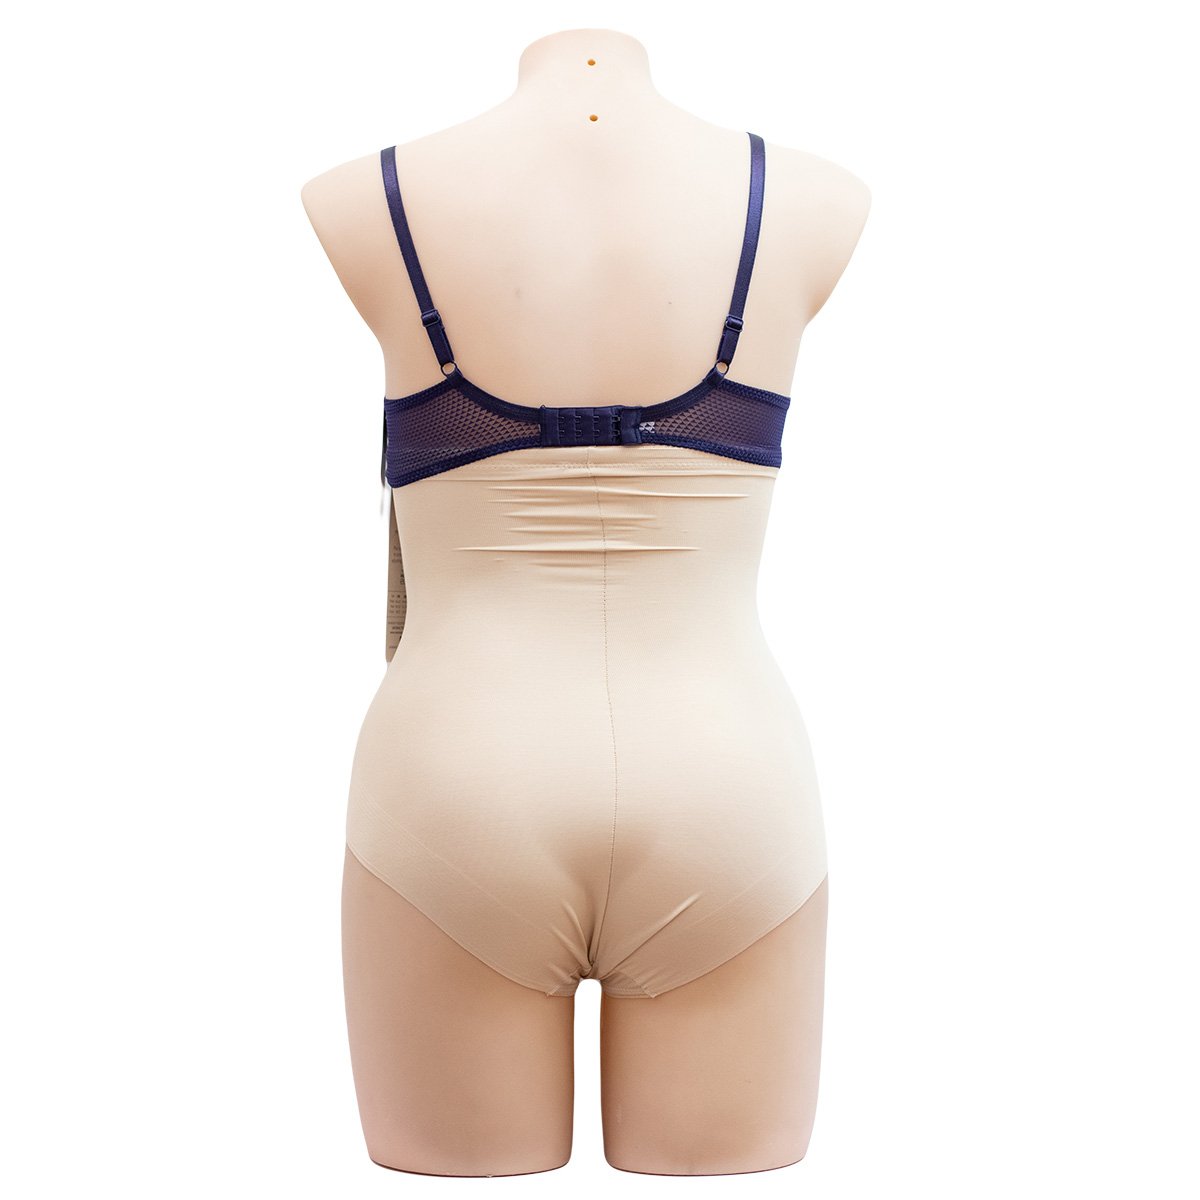 Naomi & Nicole Hi Waist Brief Comfortable Firm - Shapewear  Available at Illusions Lingerie